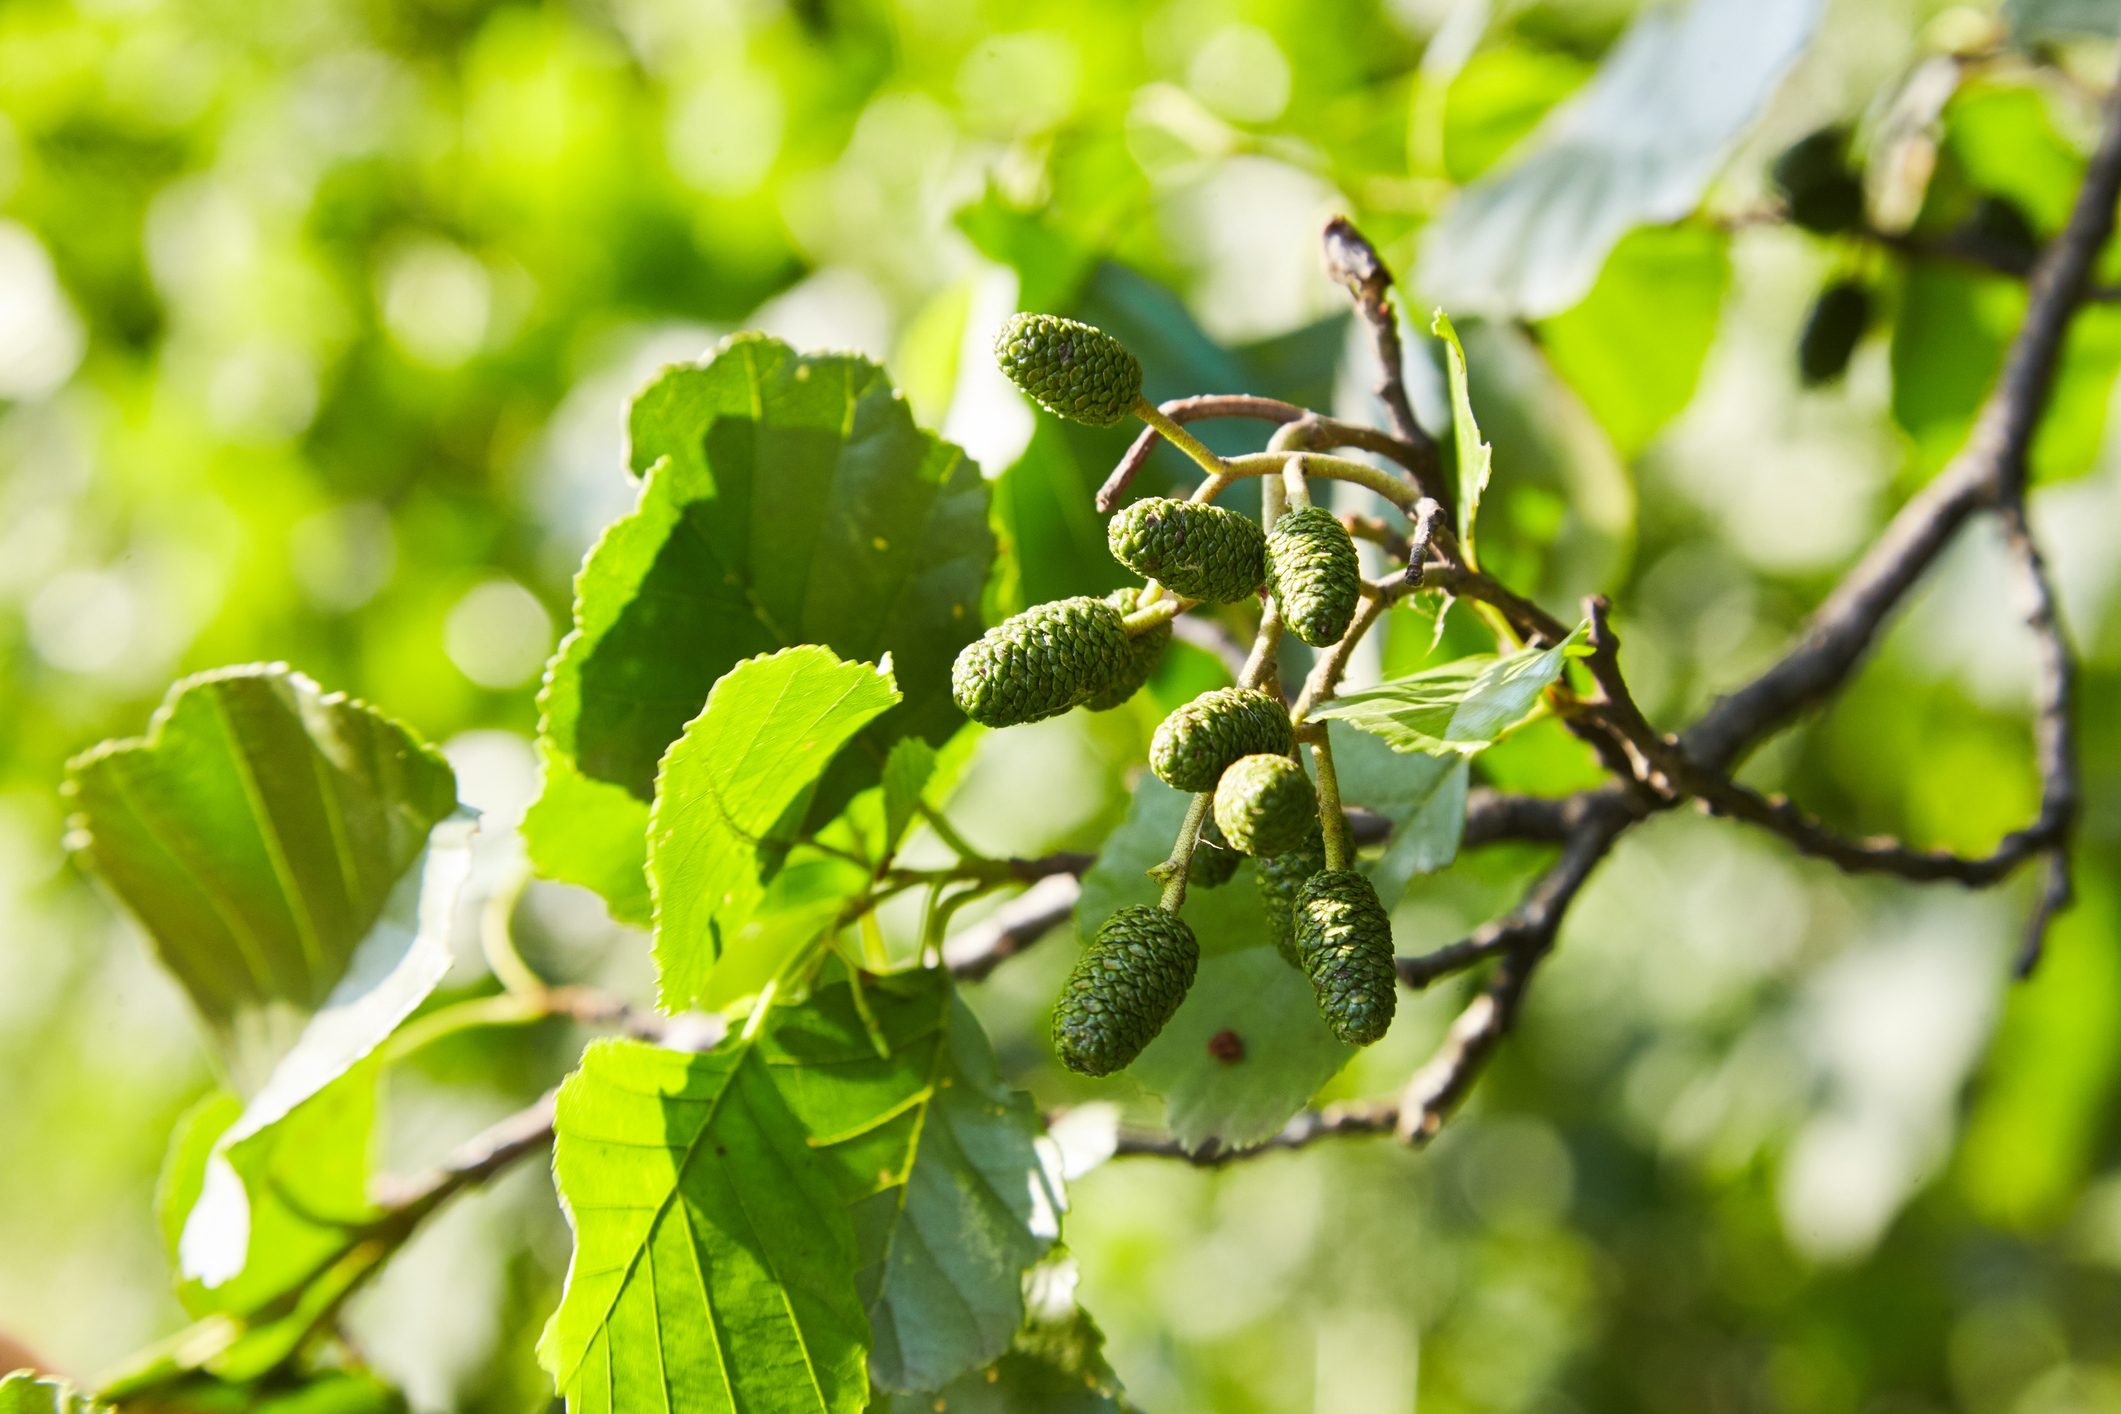 <p>If you live in wet woodlands or along a canal or riverbank, alder trees and shrubs create excellent habitat. Their seeds attract songbirds, and their abundance of insects and caterpillars great for <a href="https://www.familyhandyman.com/project/build-a-bluebird-house/" rel="noopener noreferrer">bluebirds</a> and chickadees. Moose, deer, rabbits and muskrats thrive in alder thickets.</p> <p>"These trees also provide shelter to fish and food for invertebrates, which in turn are a great food source for salmon and brown trout," says Glassey. "The wood of a common alder does not rot!"</p> <p>Various species of native alders abound from Texas into the middle and Northern states, from near sea level up to 10,000 feet. Depending on the species, sizes can range from tall trees to shrubs. Most prefer full sun to part shade. Plant one native to your region and steer clear of European black alder, which can be invasive in places.</p>